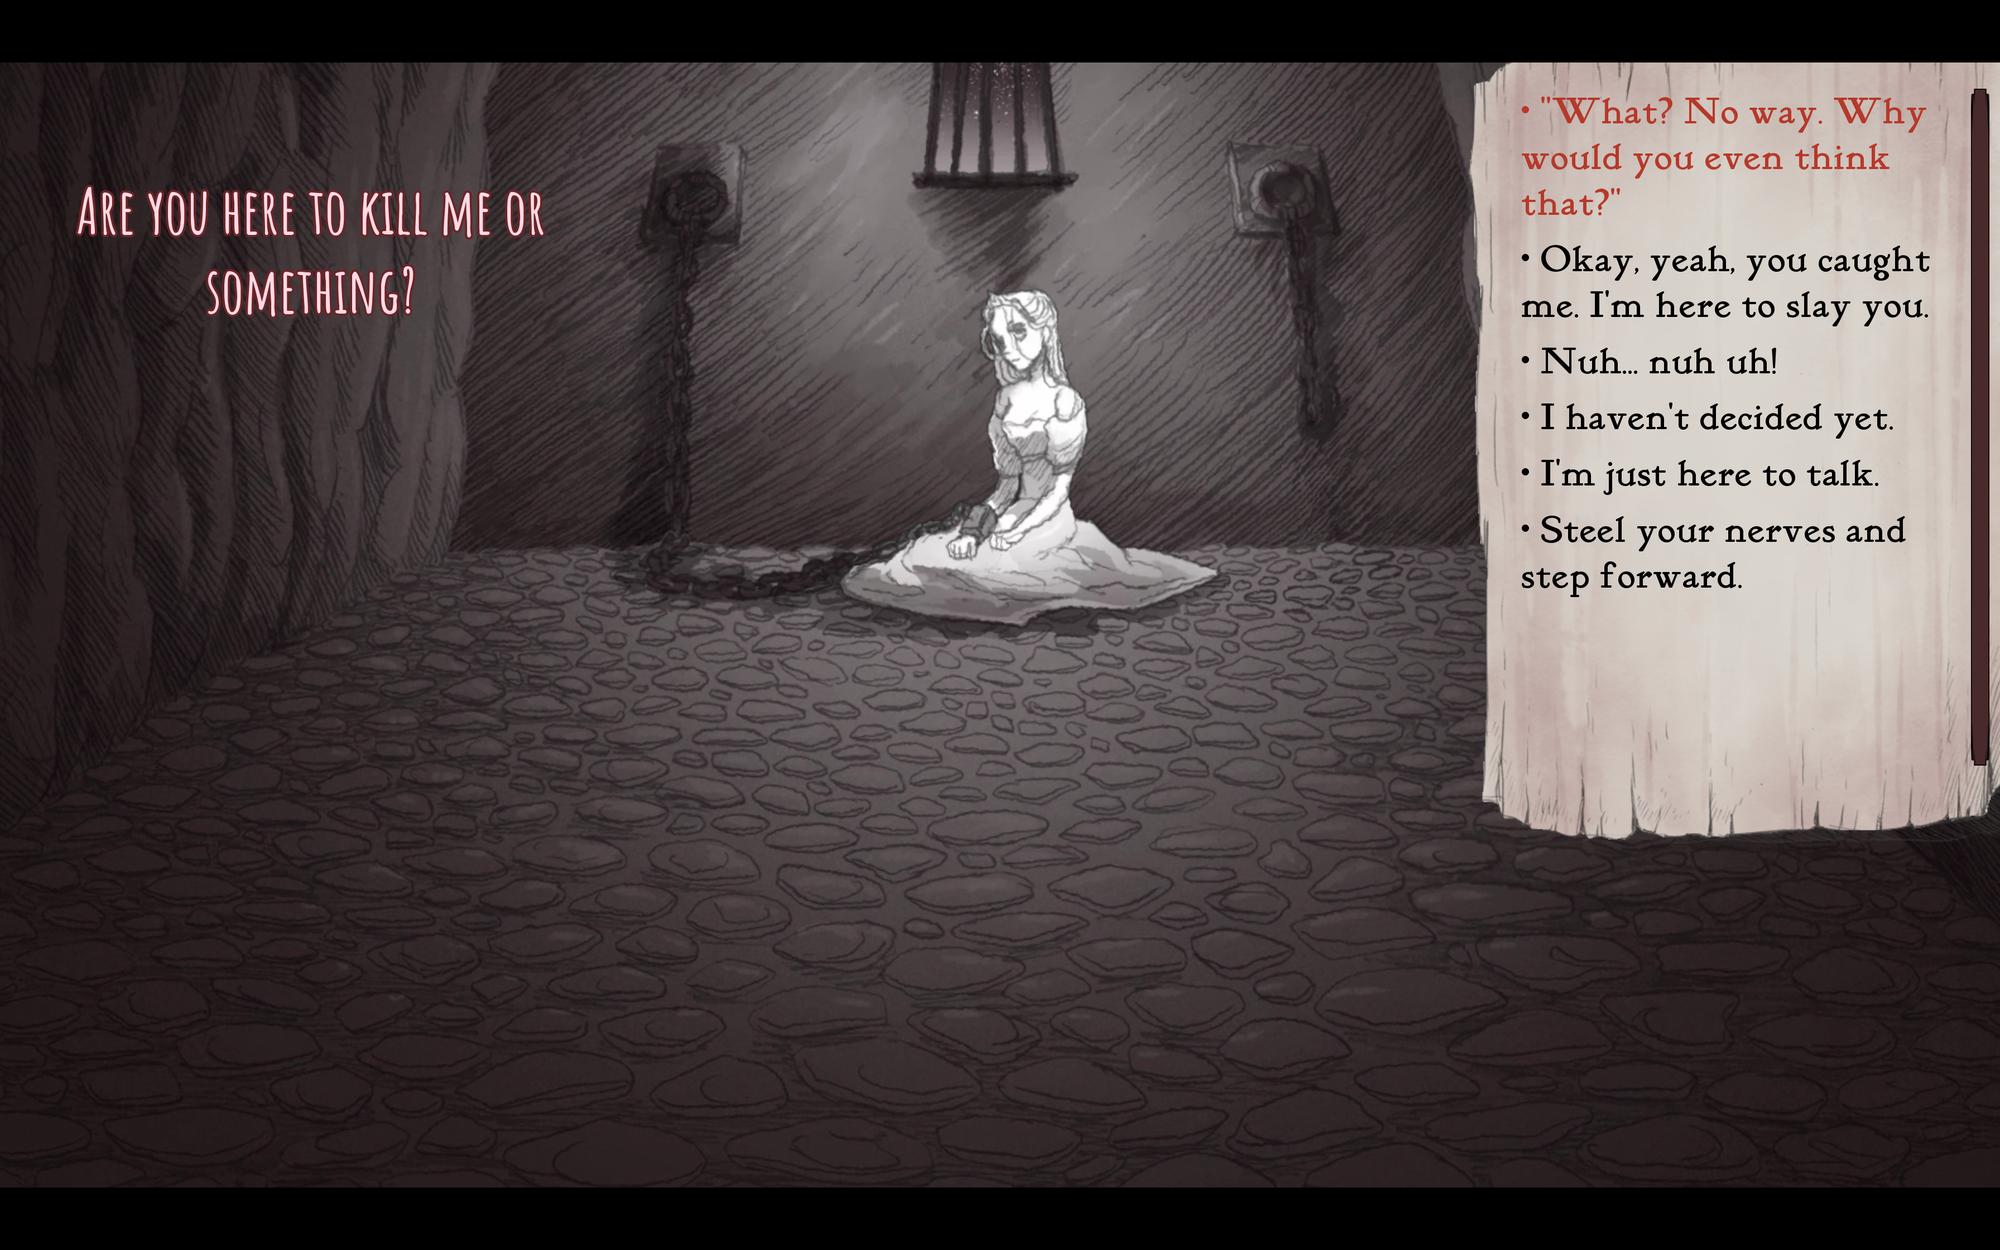 Screenshot of the game. The Princess asks if you are there to kill here. Dialogue options appear on the right.